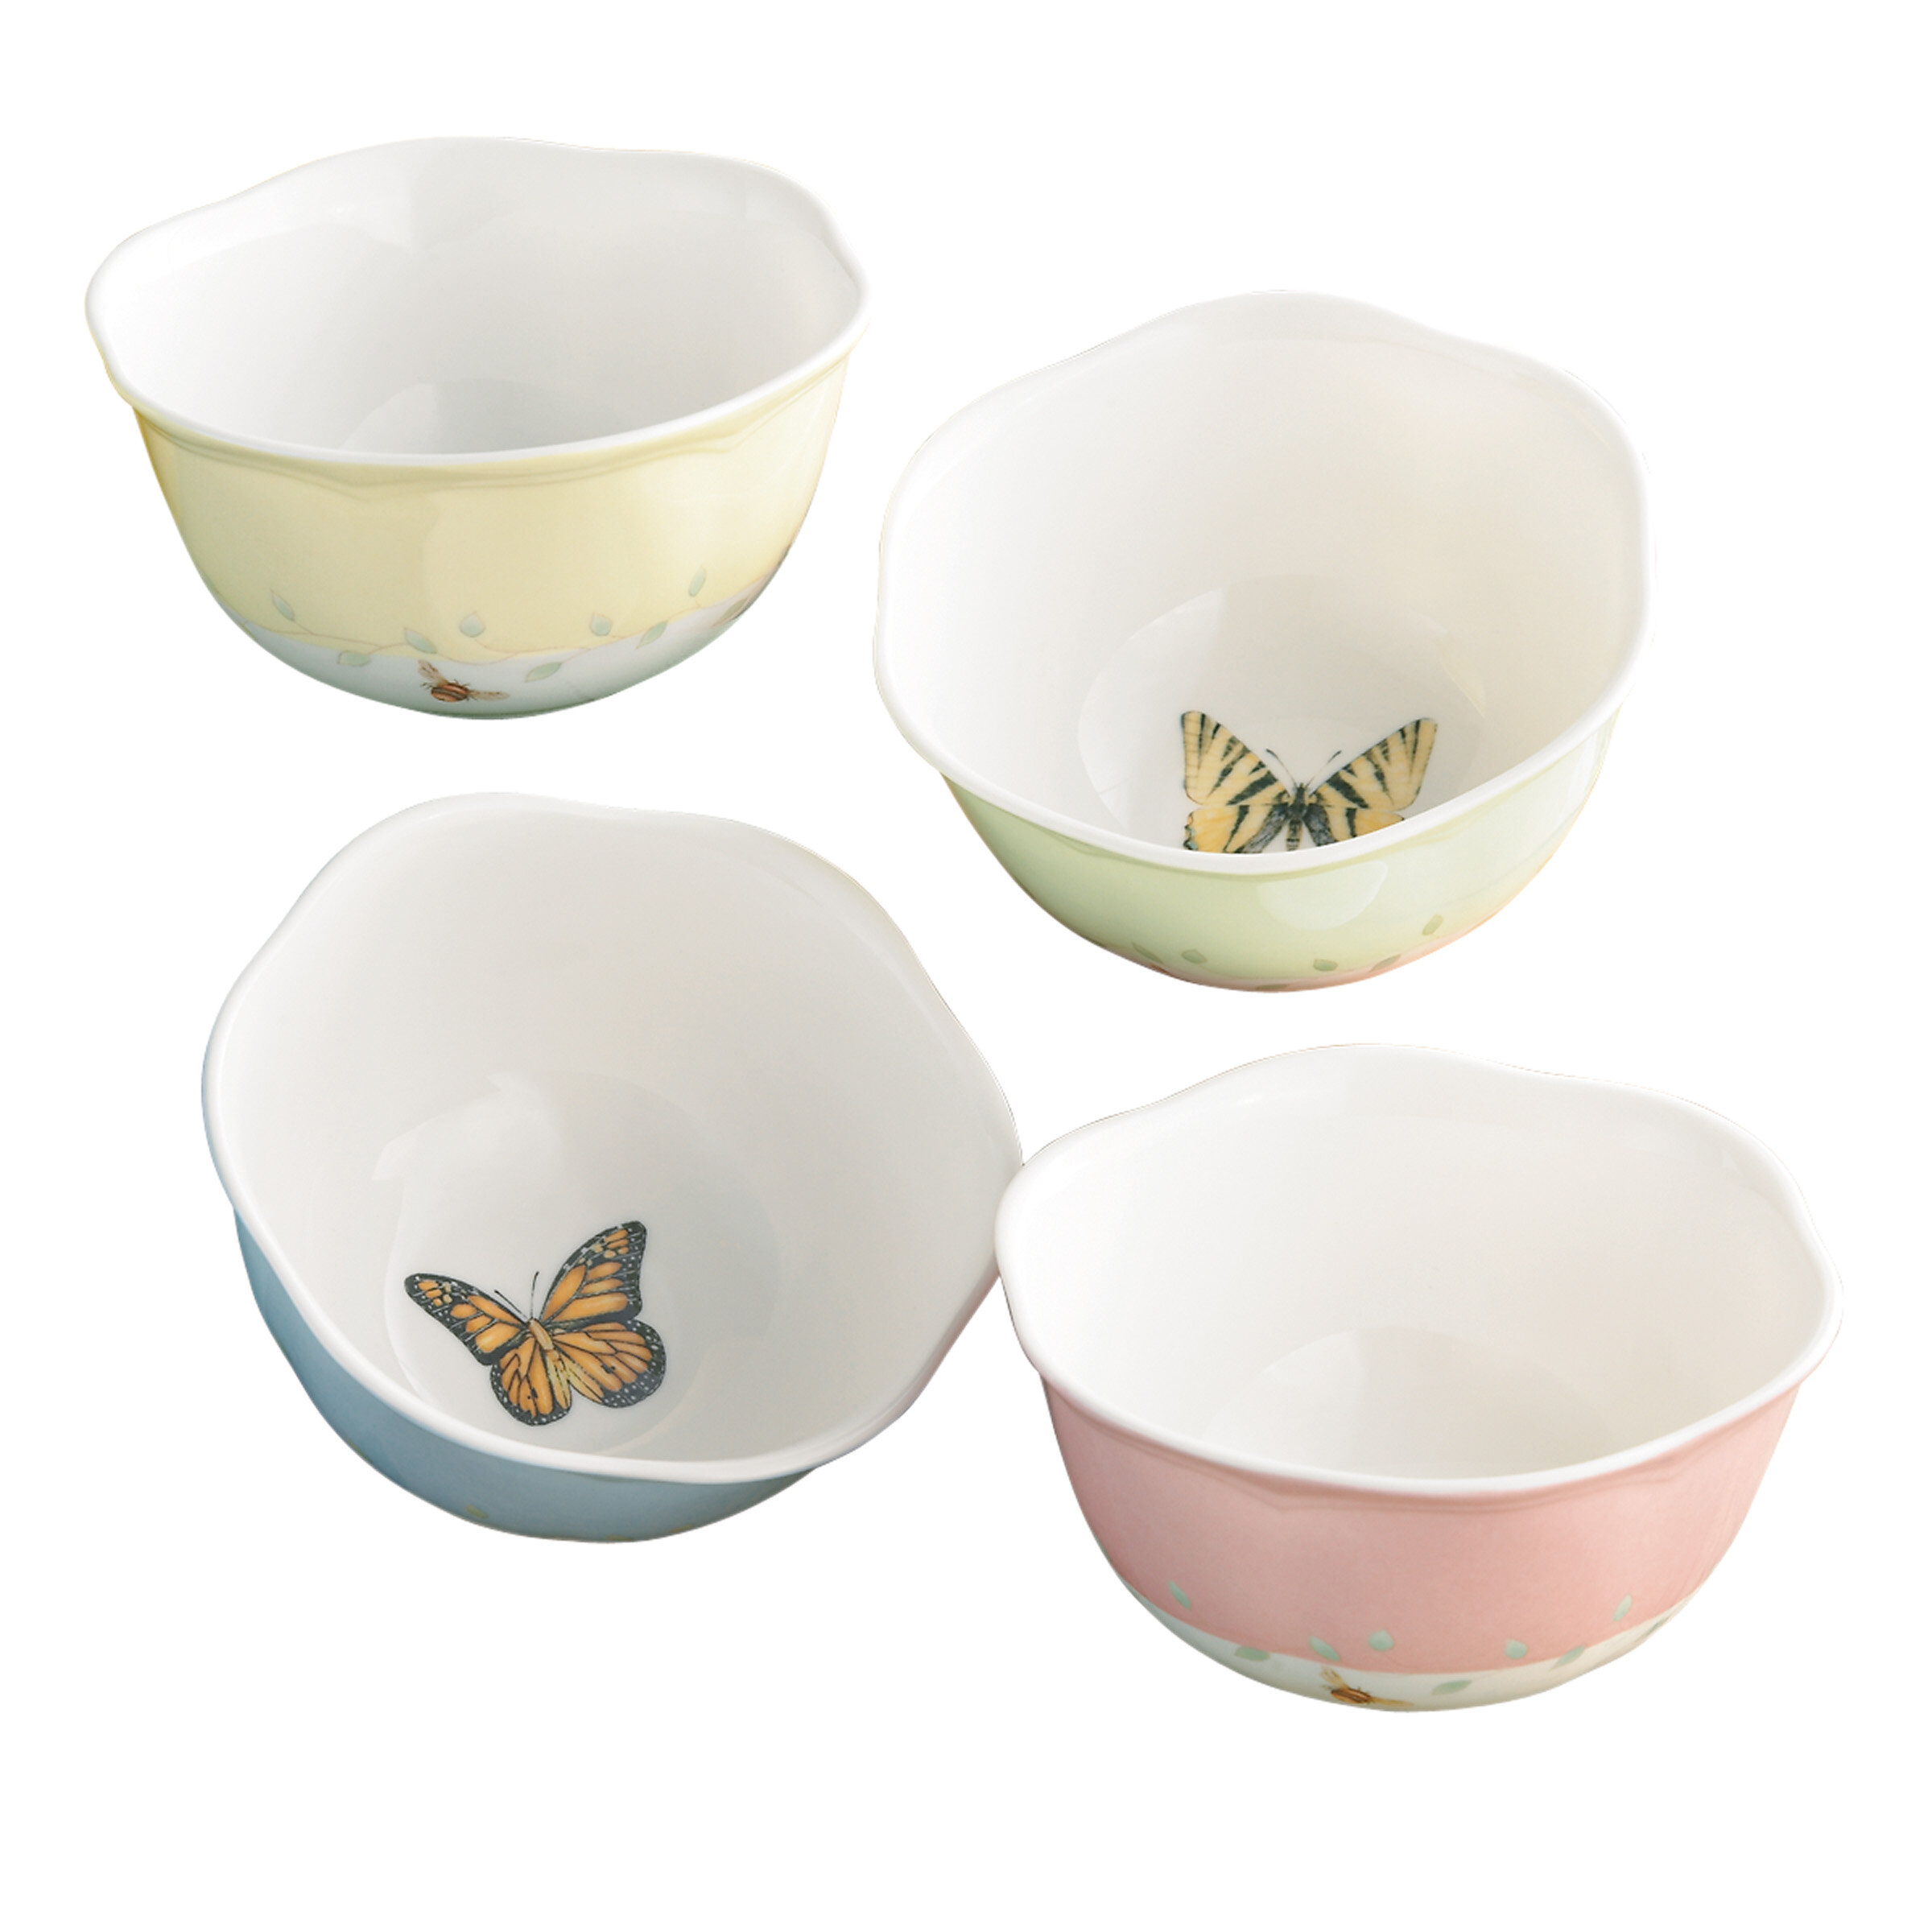 Butterfly Meadow Melamine Large Serving Bowl